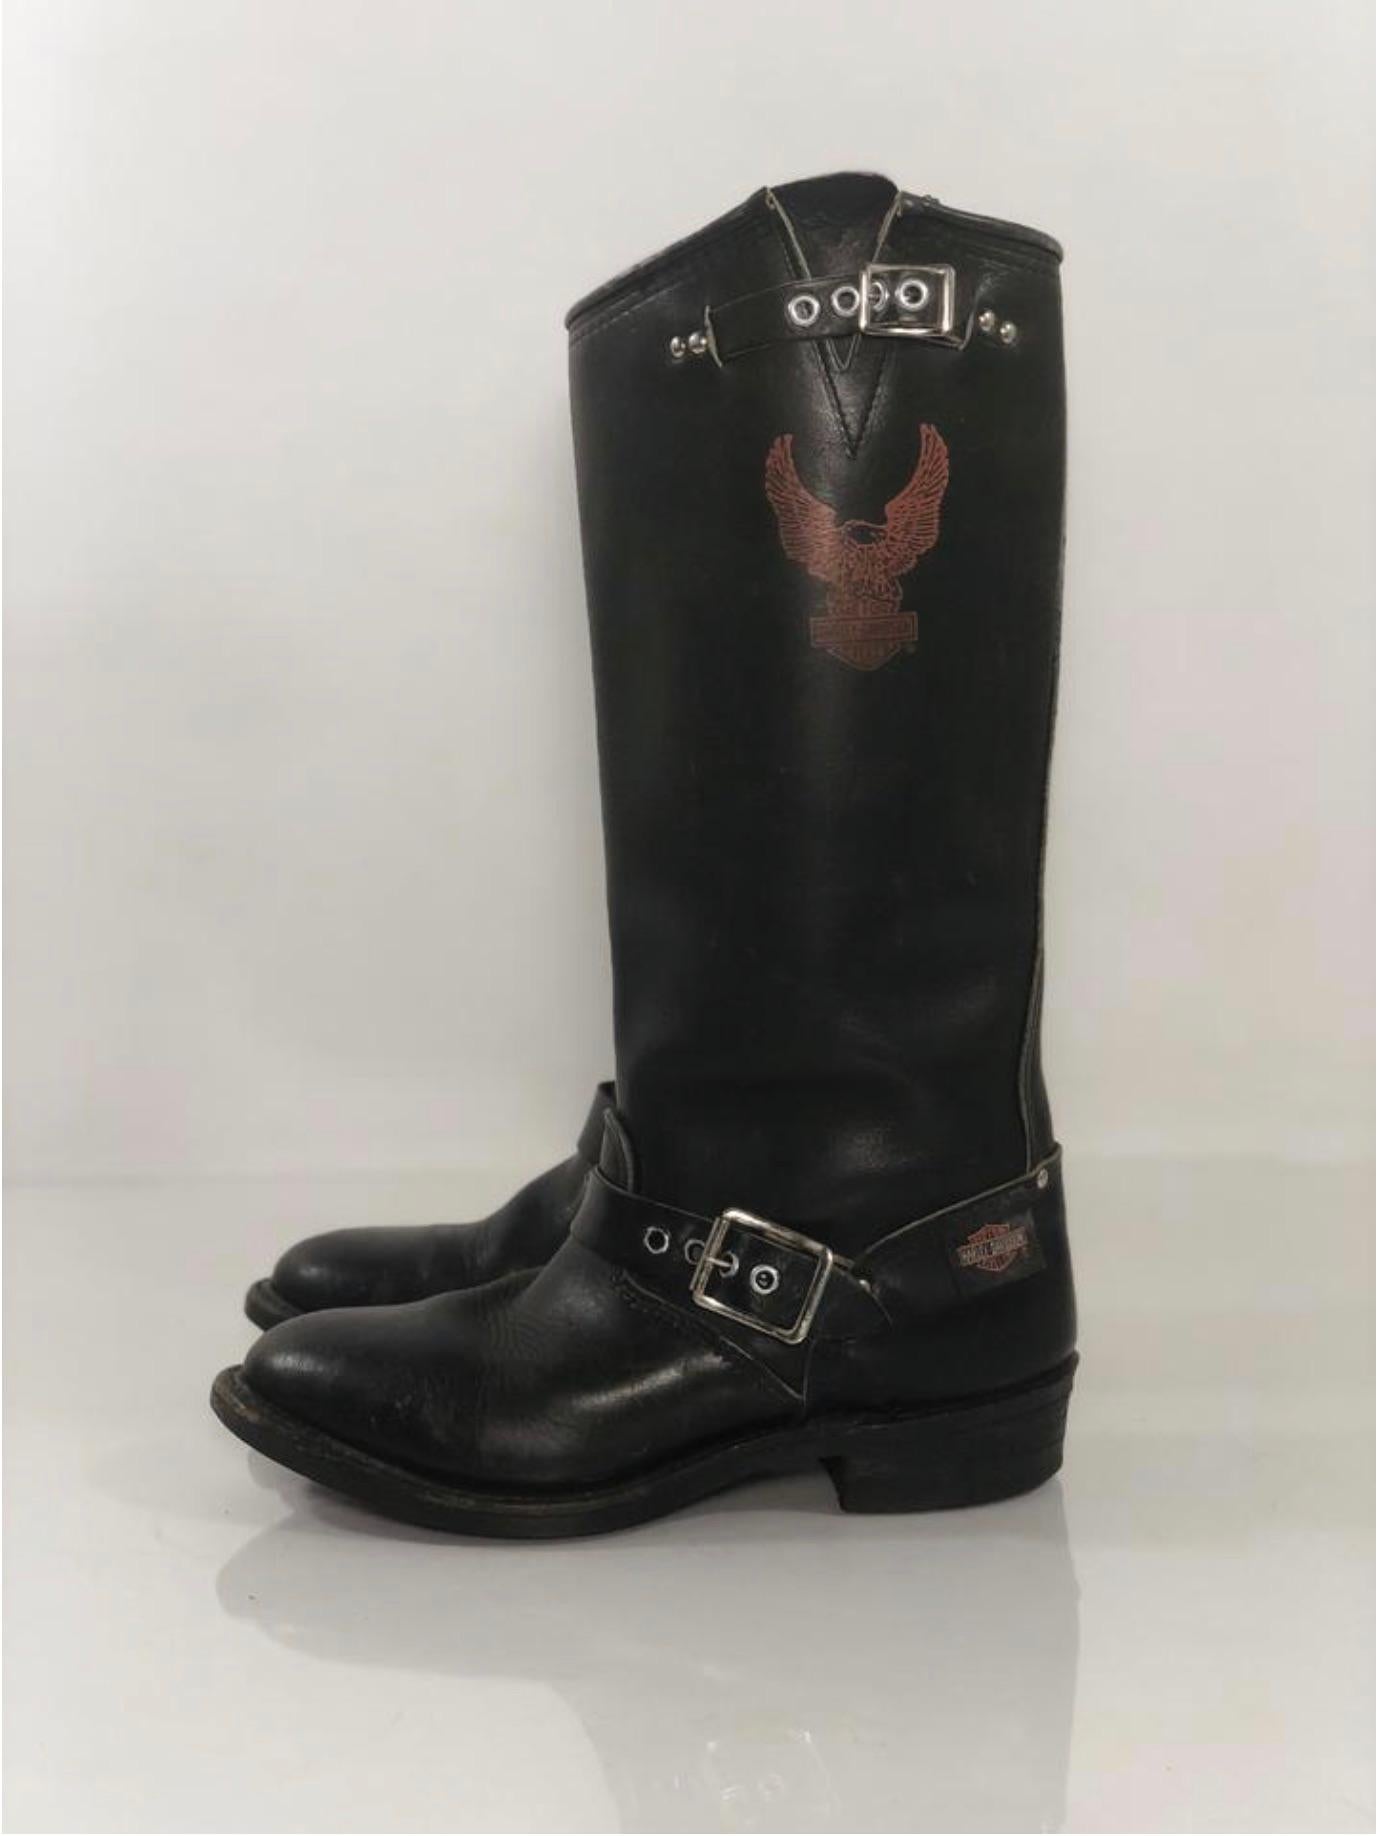  Harley Davidson Black Leather Tall Biker Buckle Boots In Good Condition For Sale In Saint Charles, IL